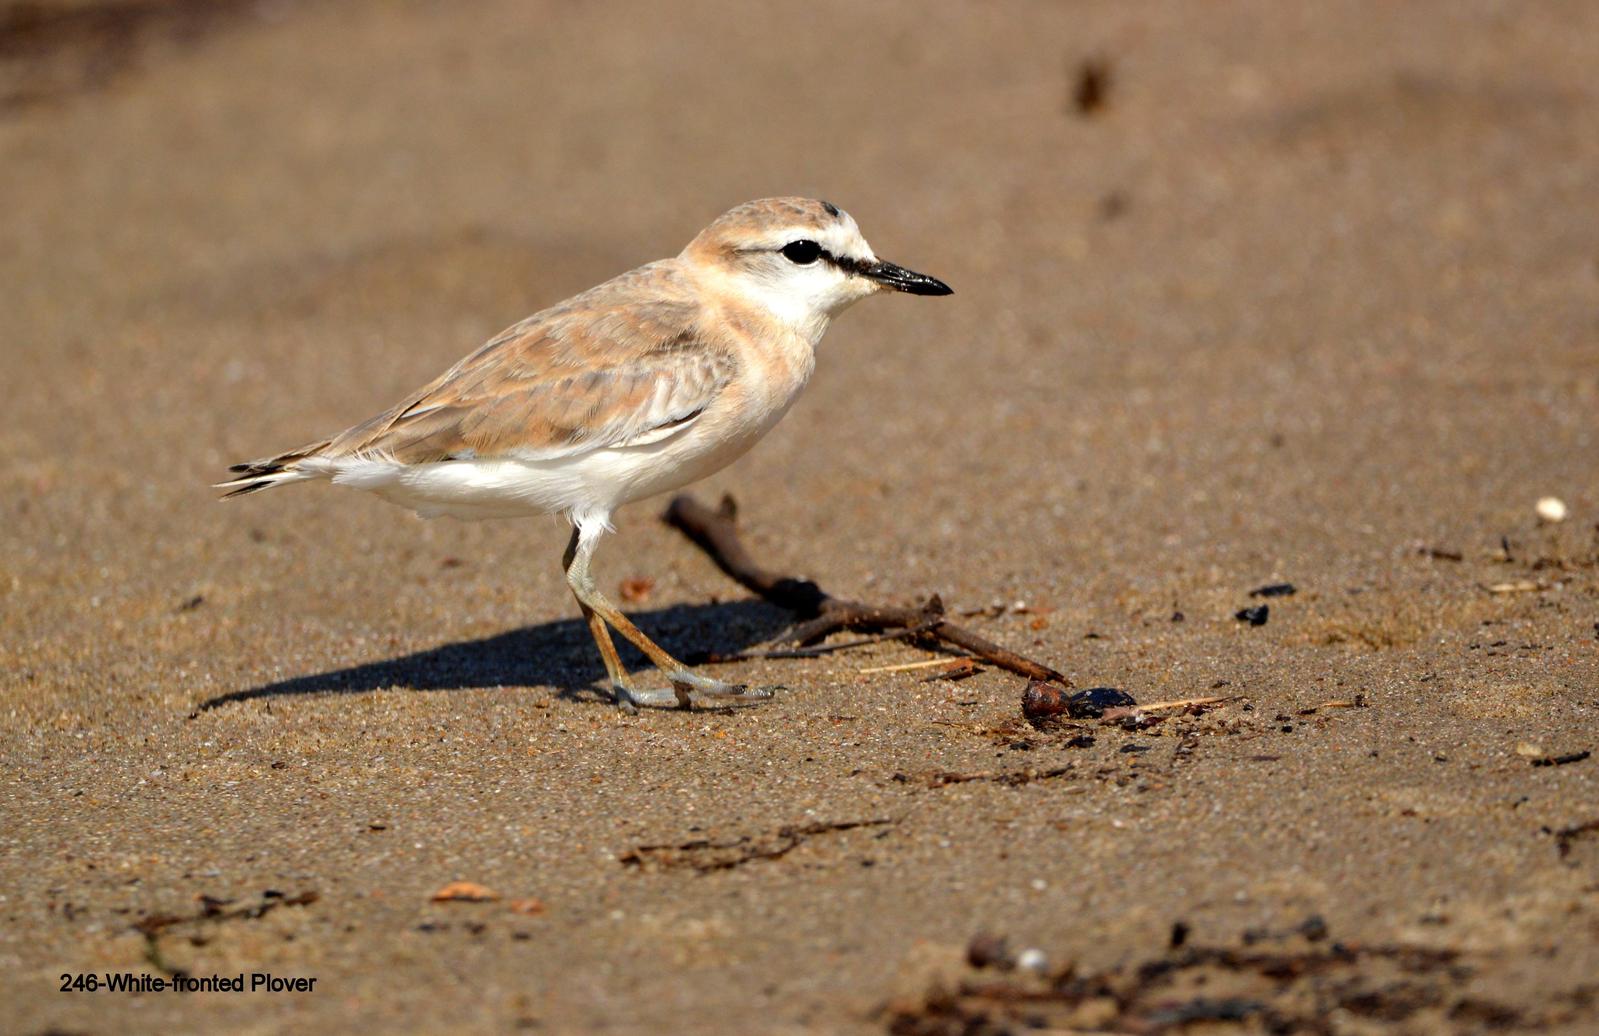 White-fronted Plover Photo by Richard  Lowe